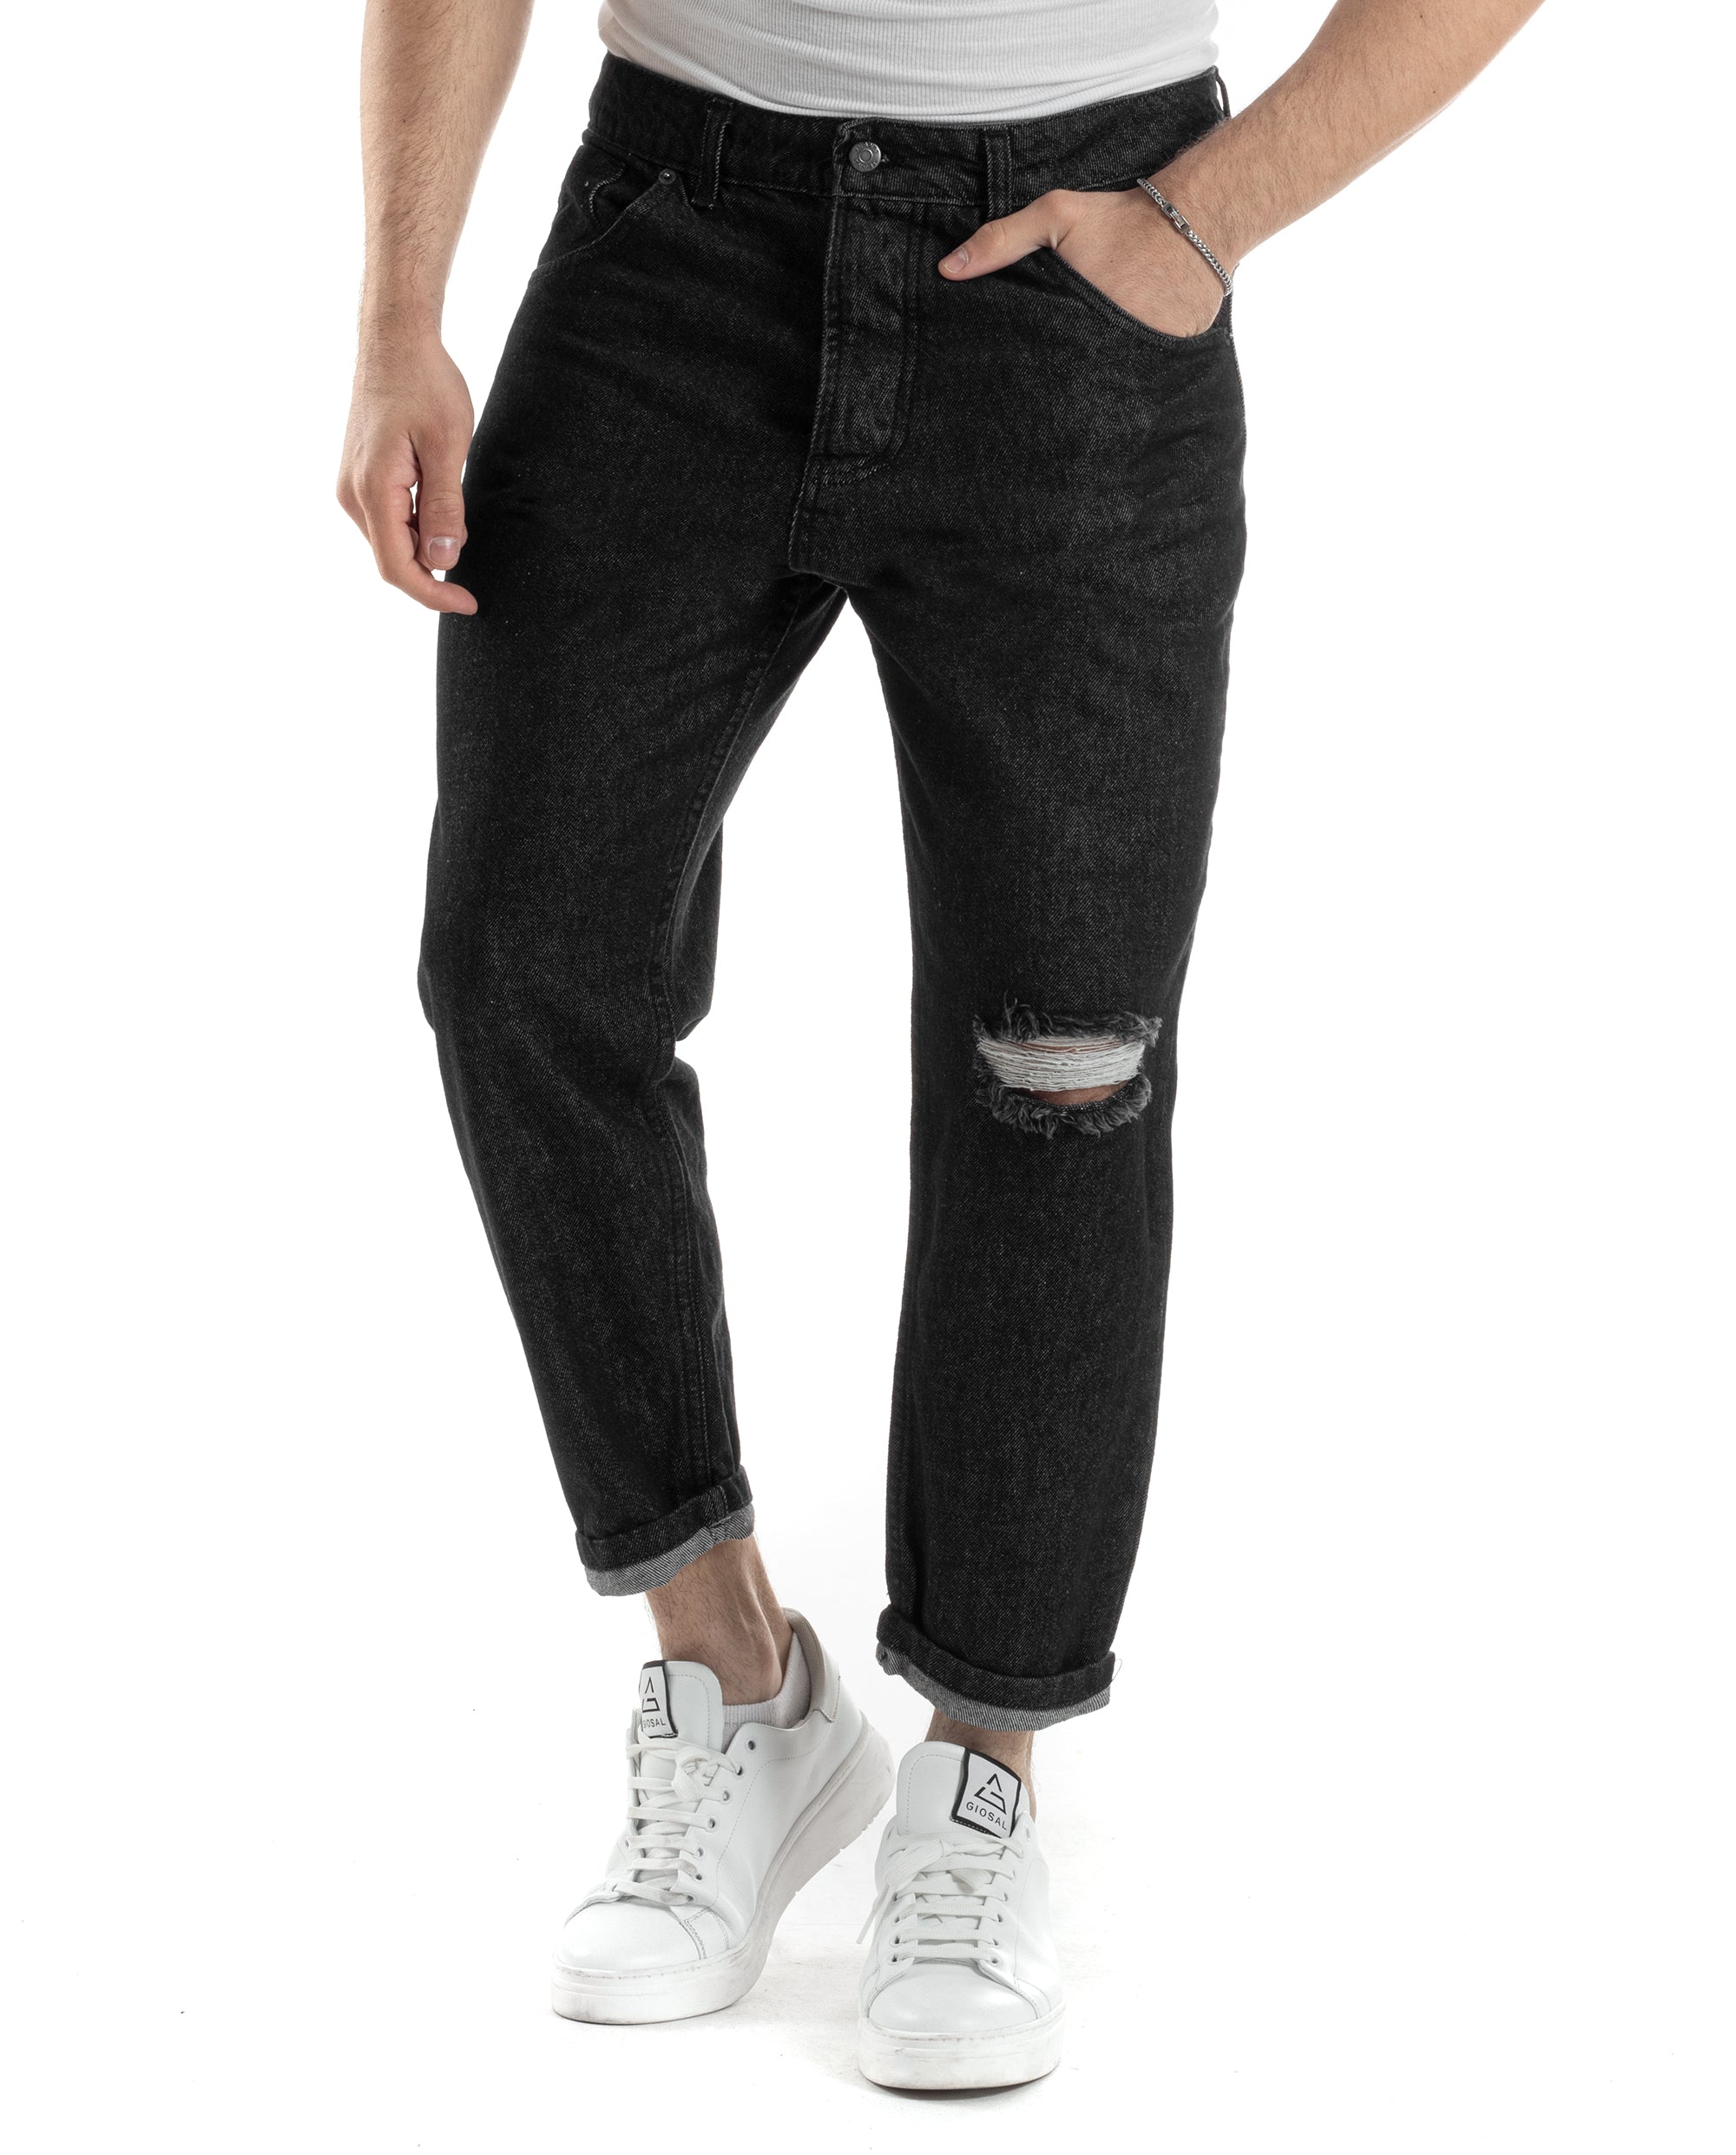 Men's Jeans Trousers Loose Fit Black Denim Basic Five Pockets Casual GIOSAL-P3600A